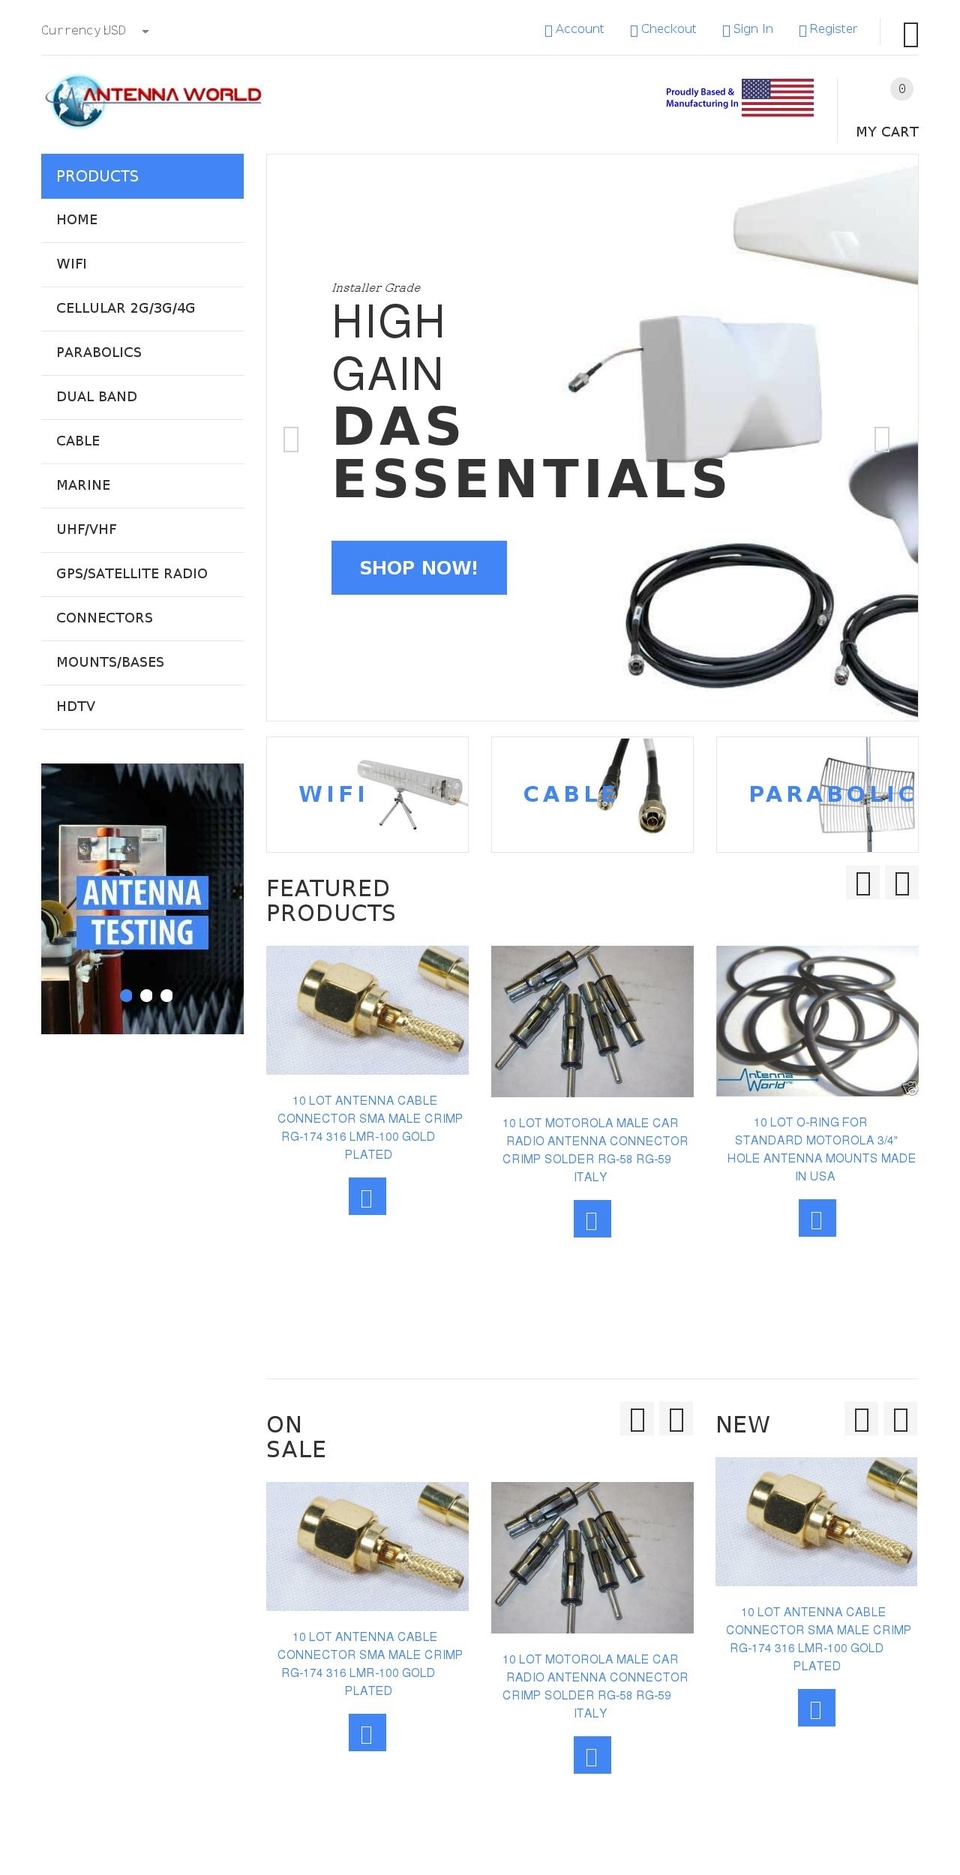 yourstore-v2-1-5 Shopify theme site example antennaworld.com